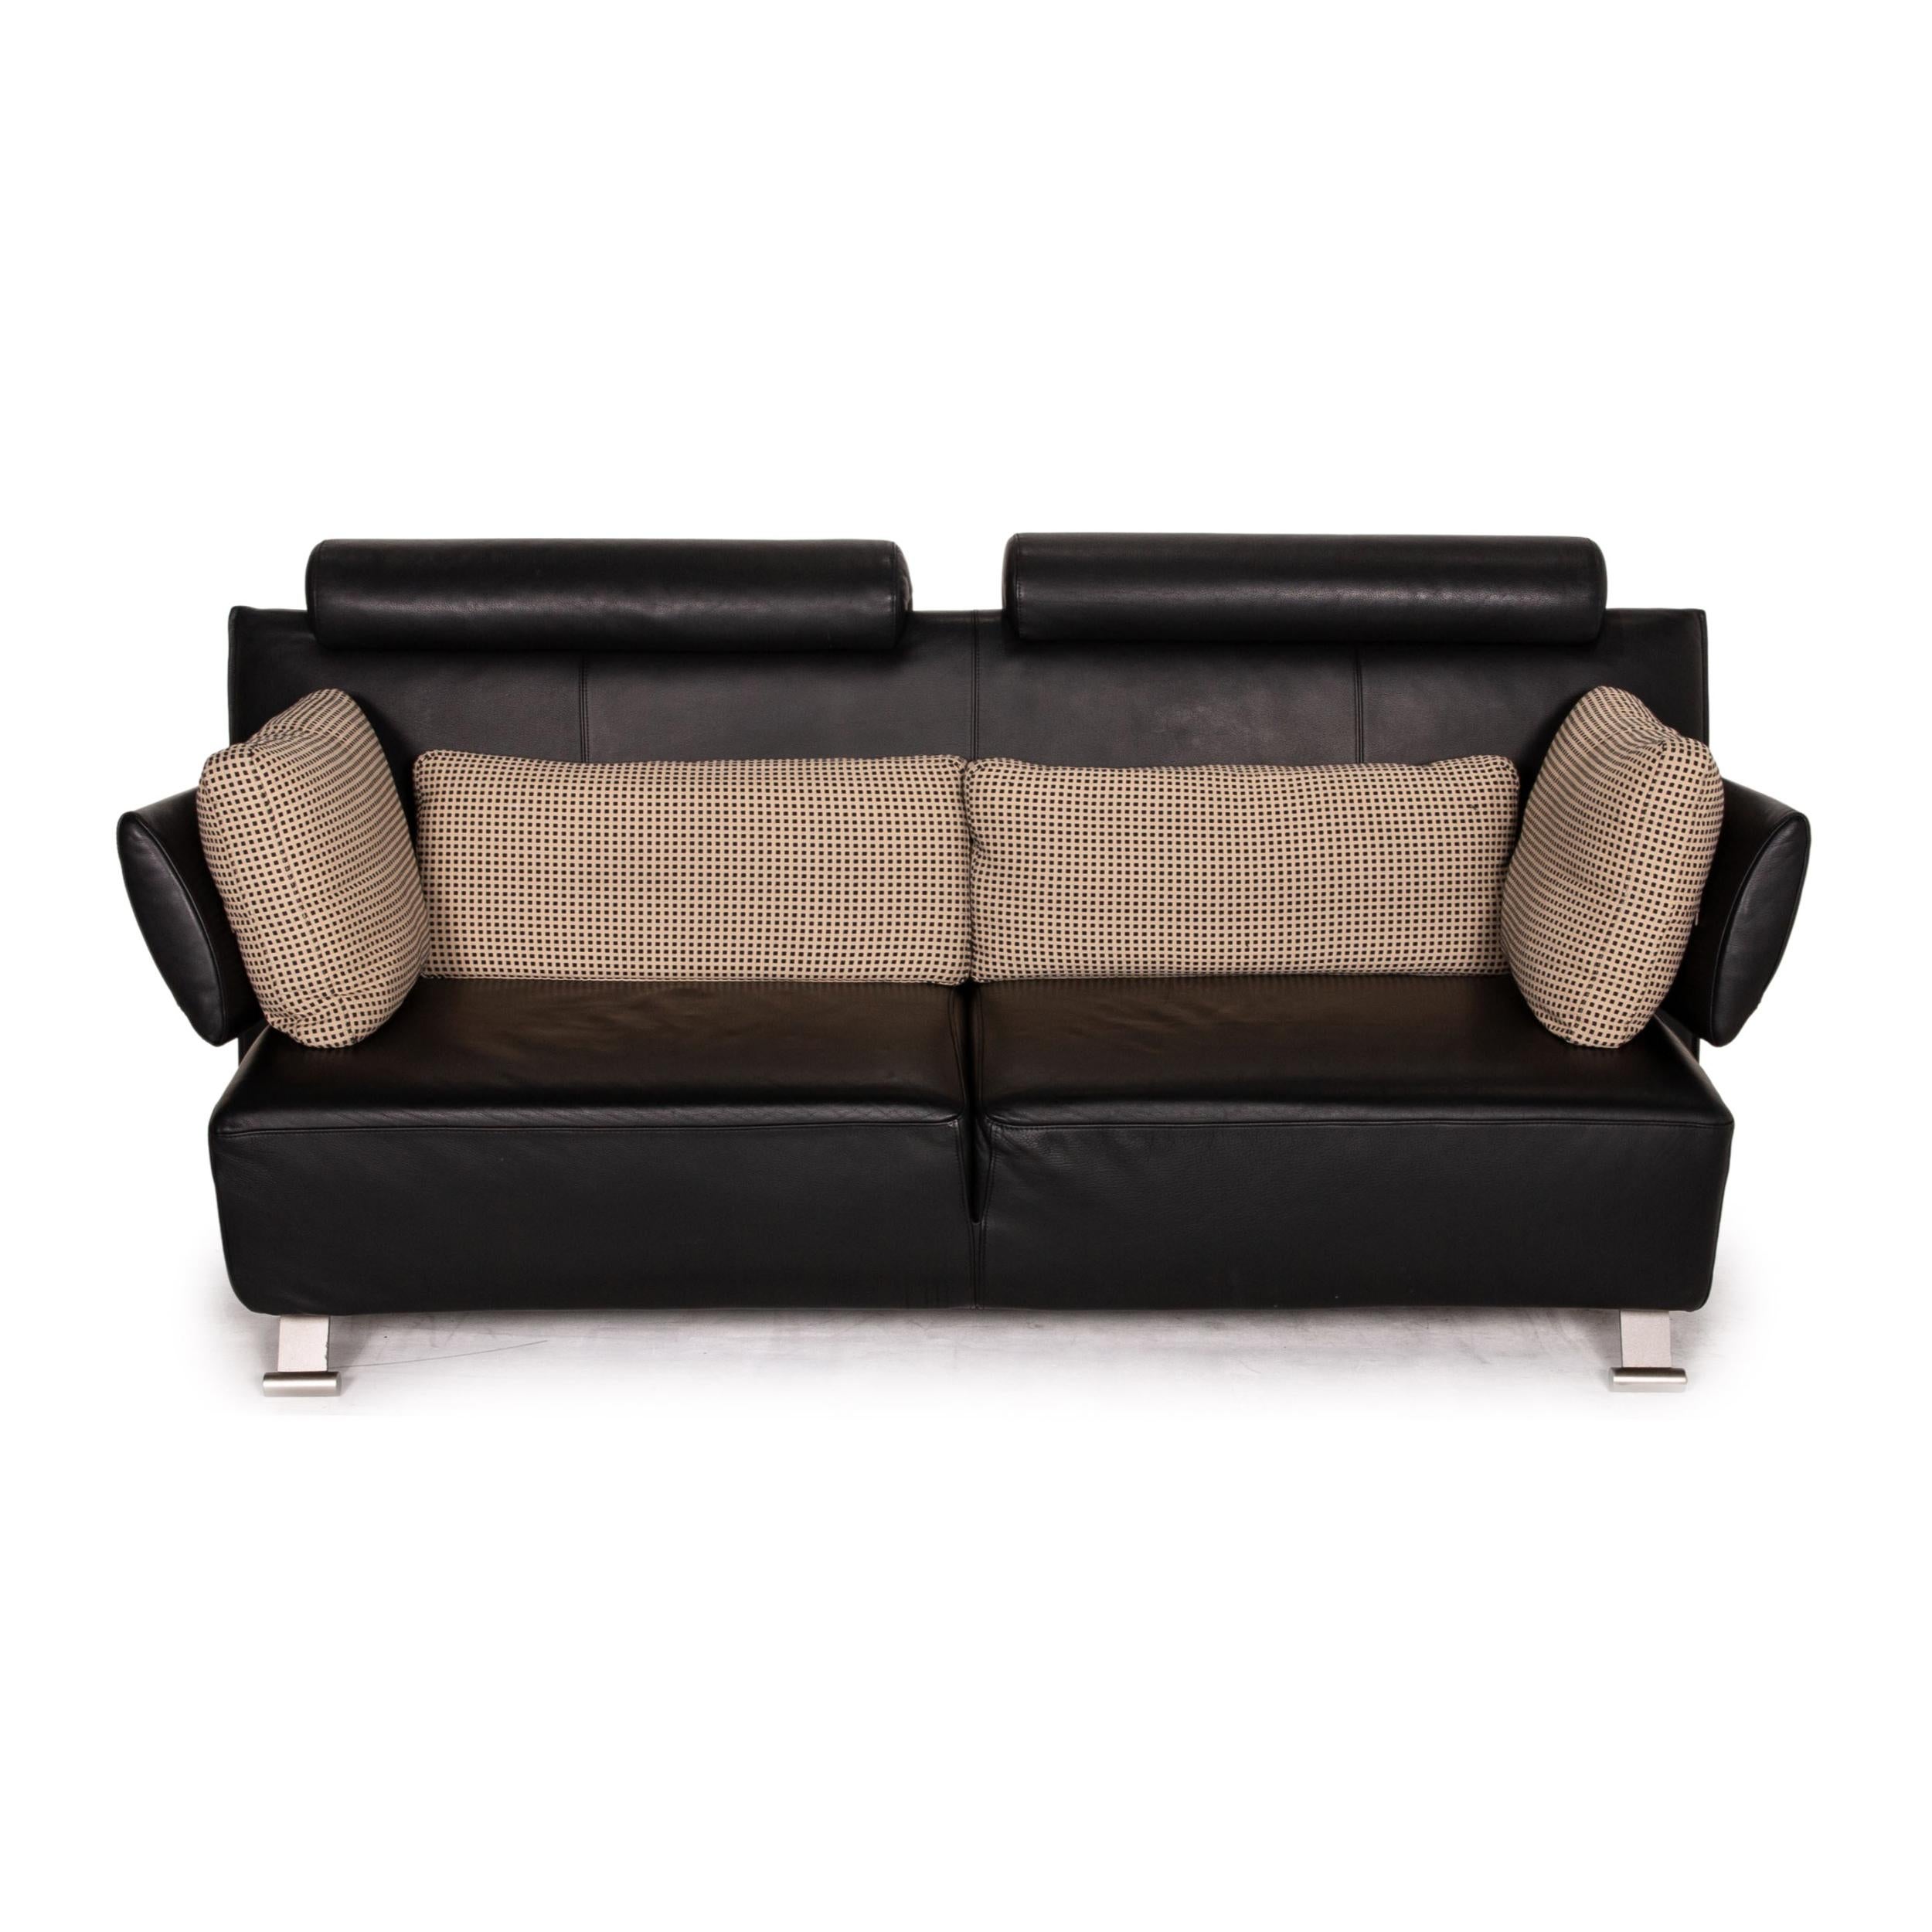 COR Sera Leather Sofa Black Two-Seater Function Couch For Sale 3